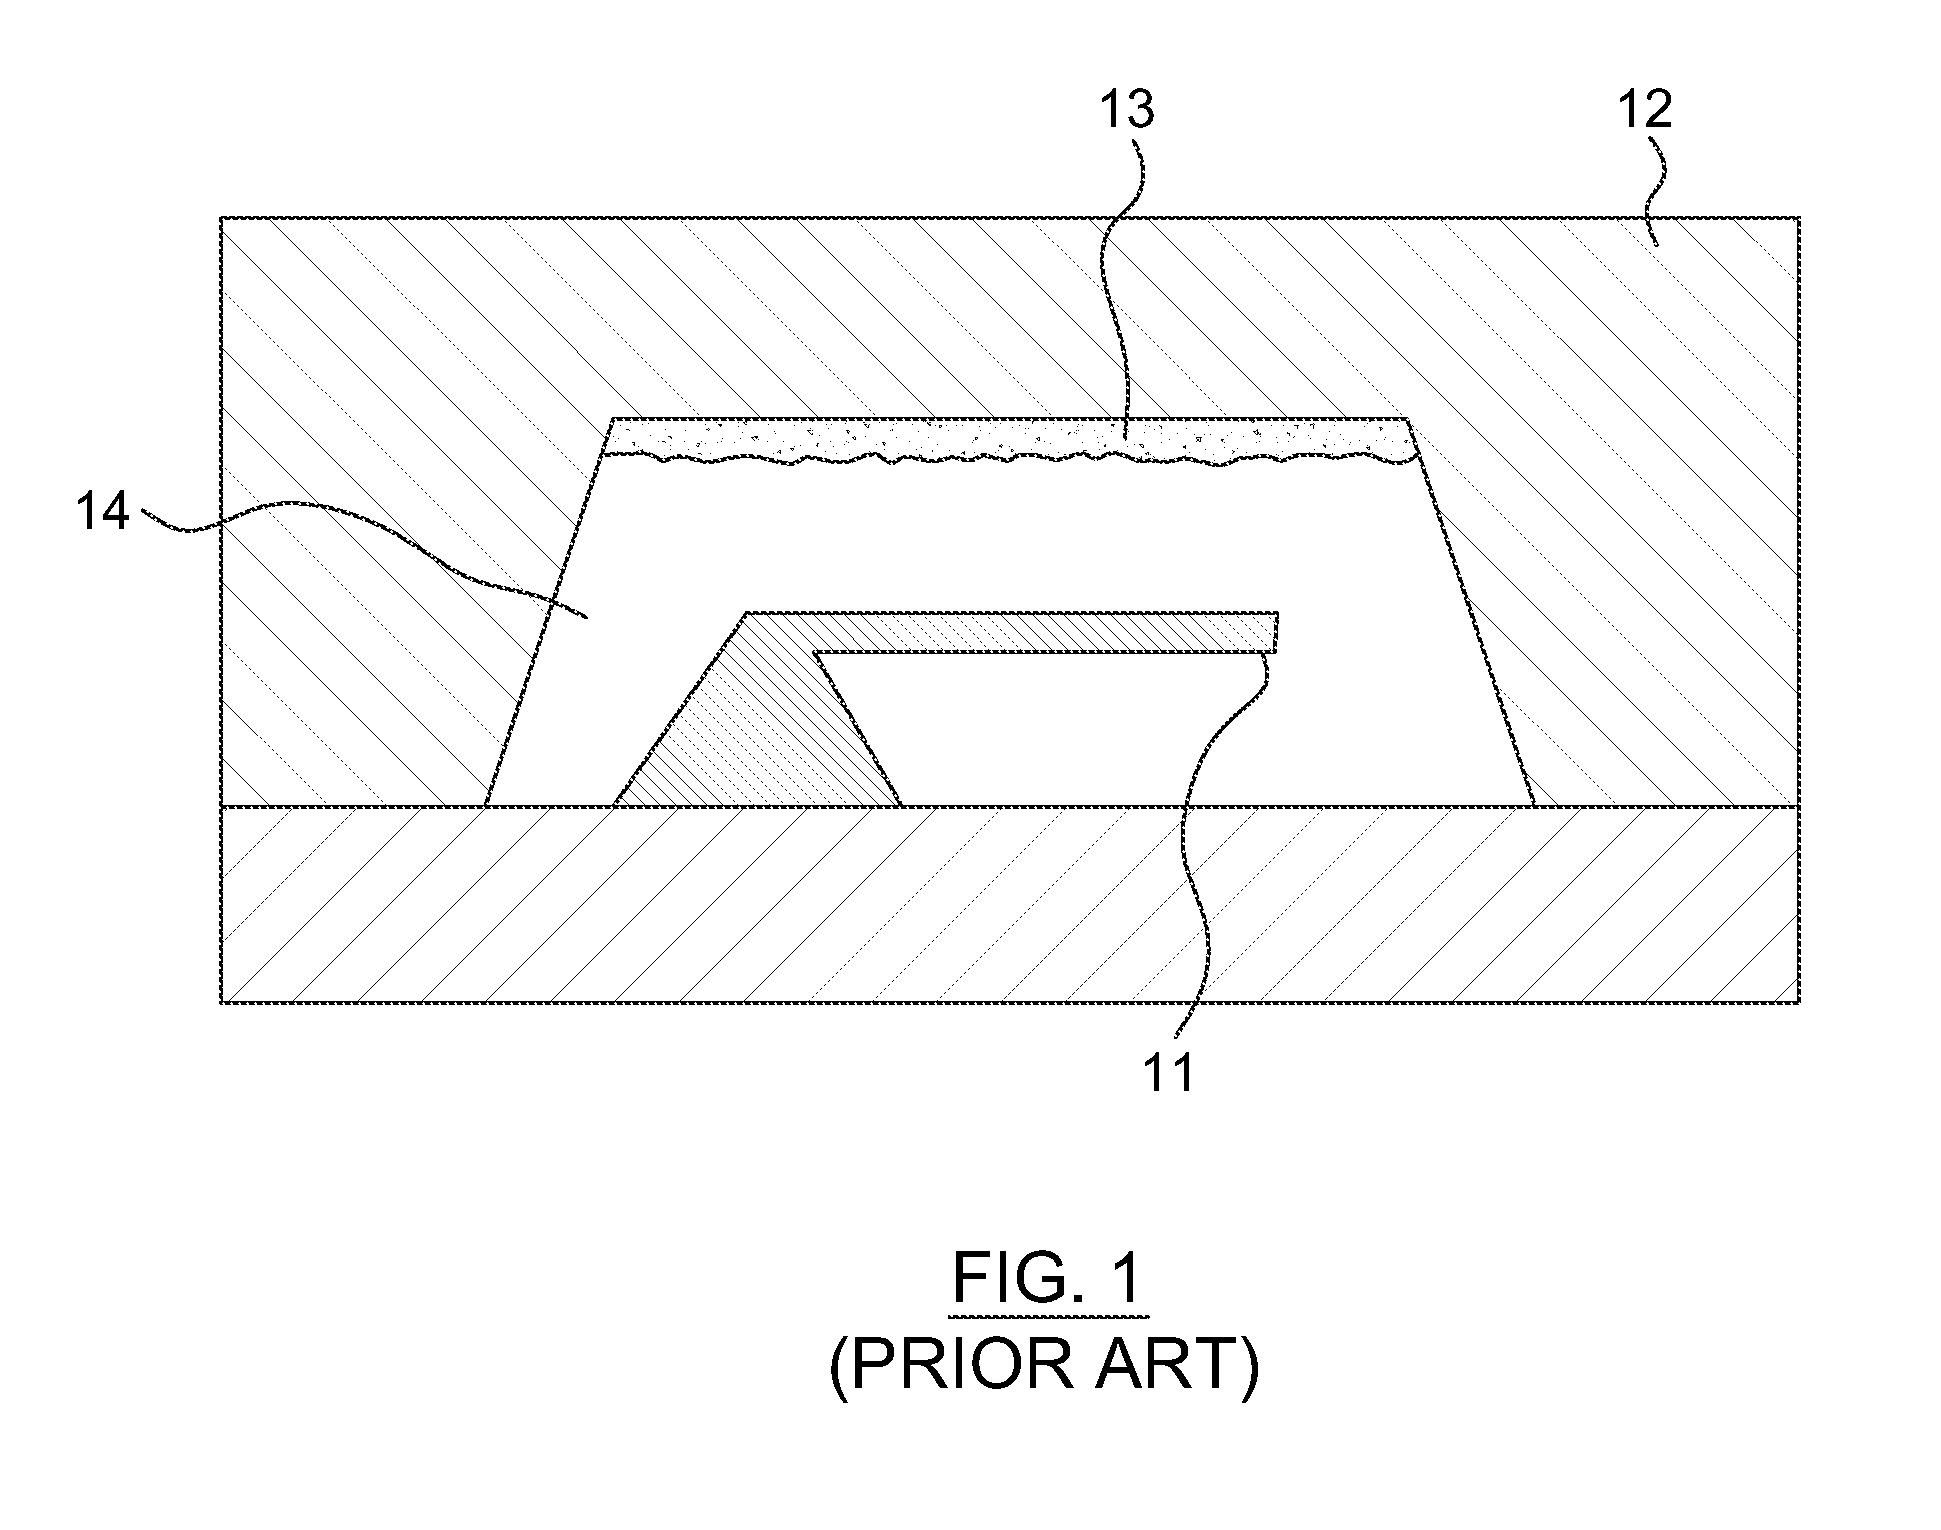 MEMS-based getter microdevice